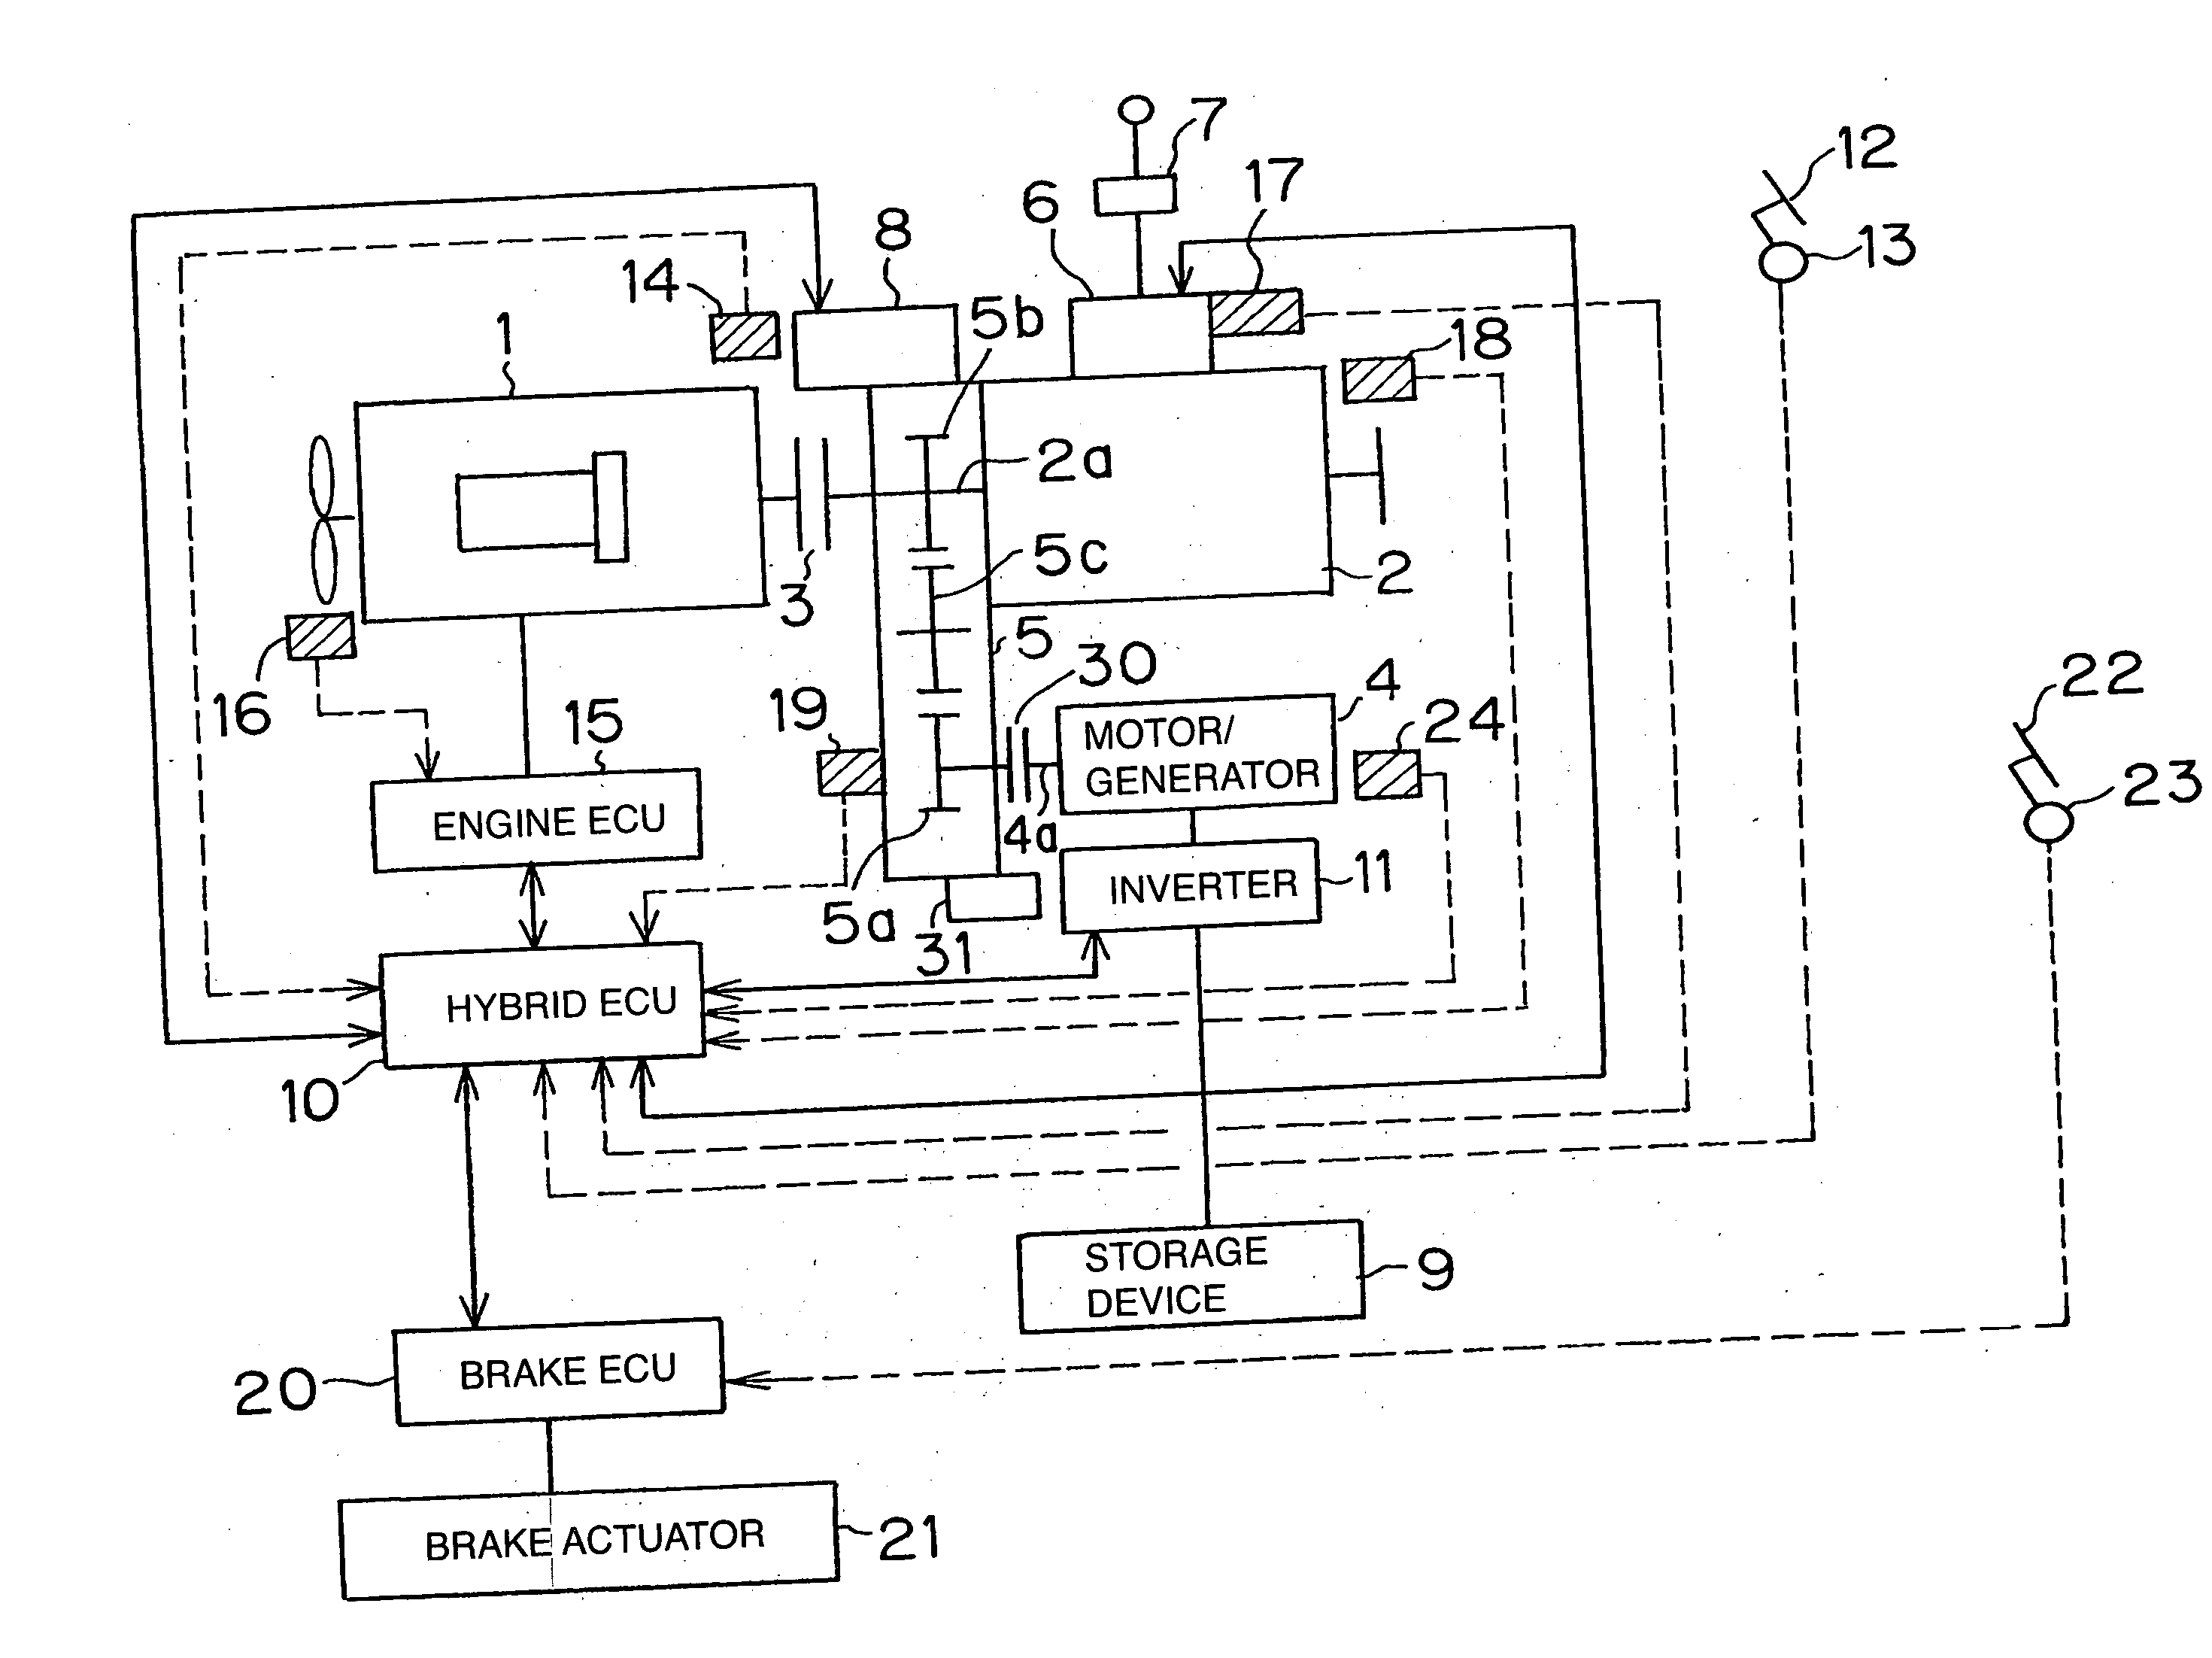 Hybrid drive system of vehicle